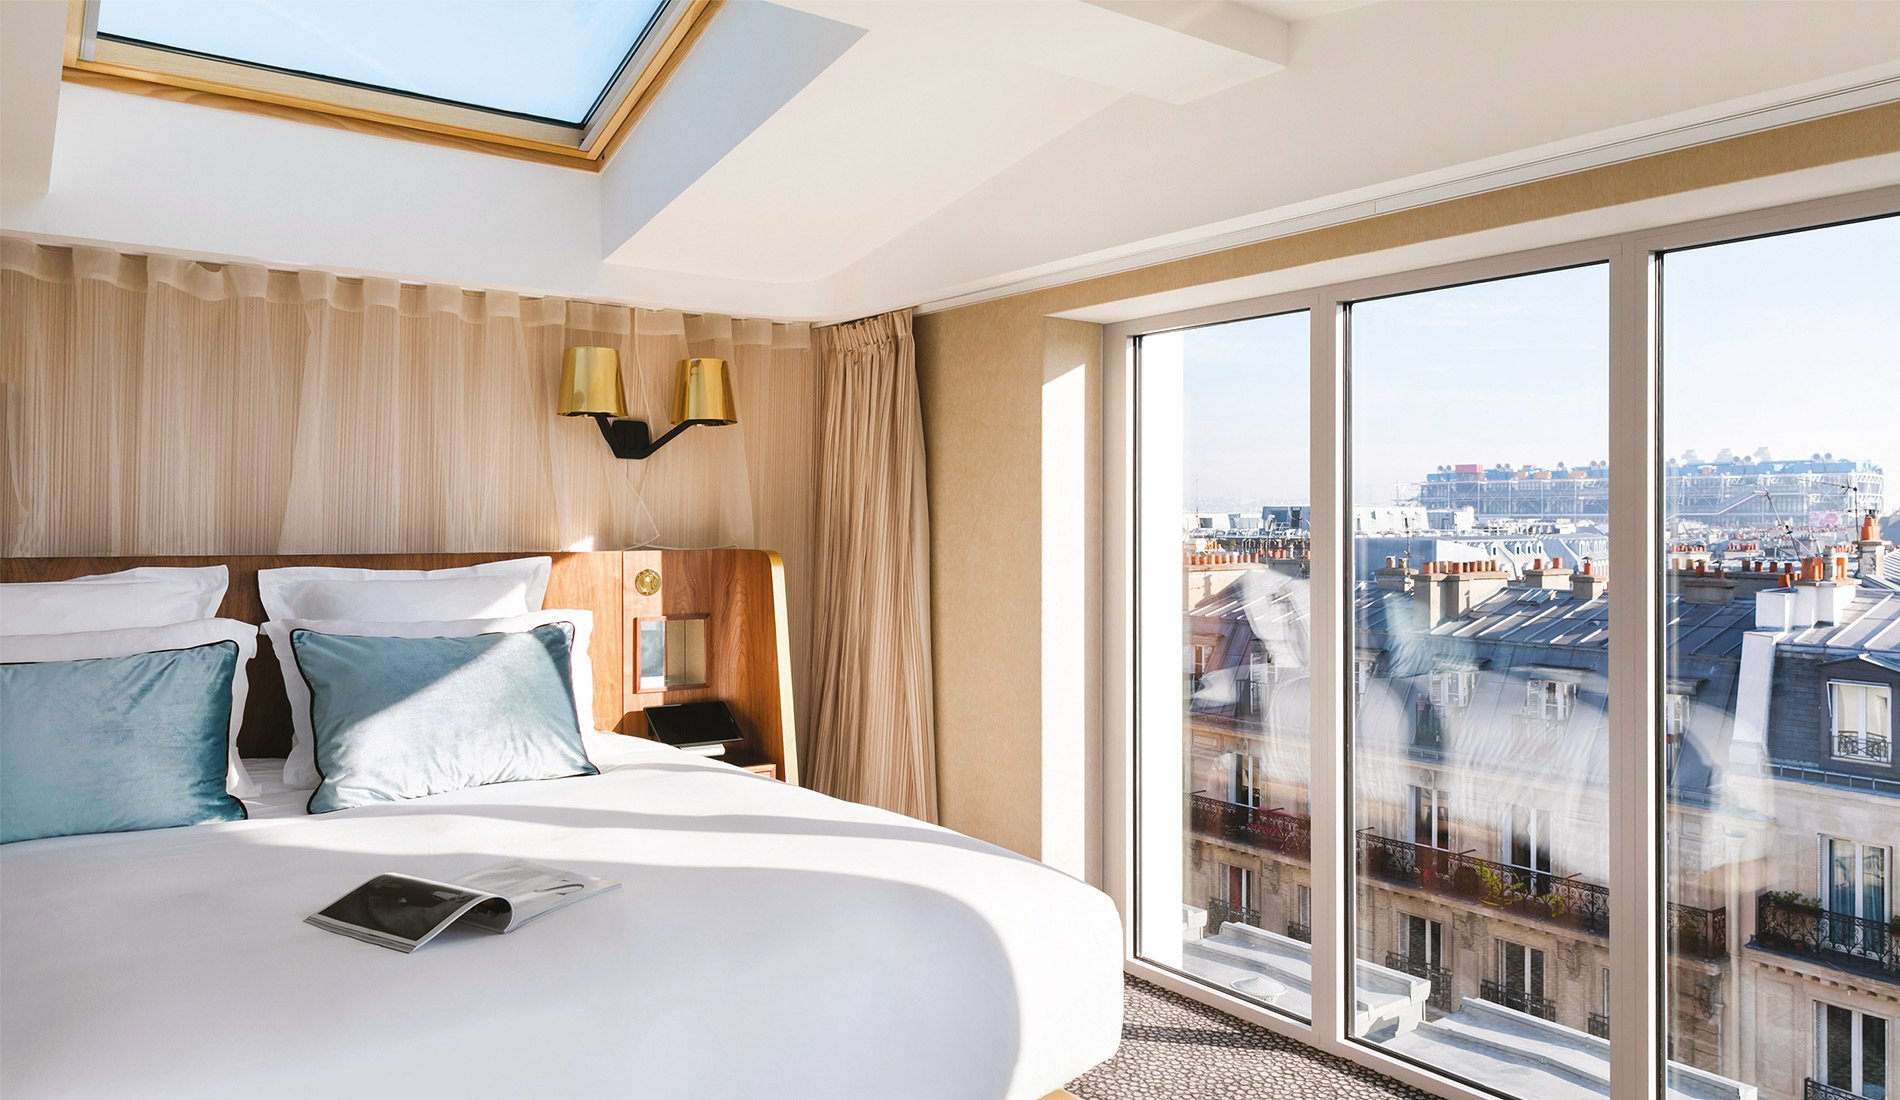 Luxury hotel - Maison Albar Hotels Le Pont-Neuf - 5-star - room with Paris view